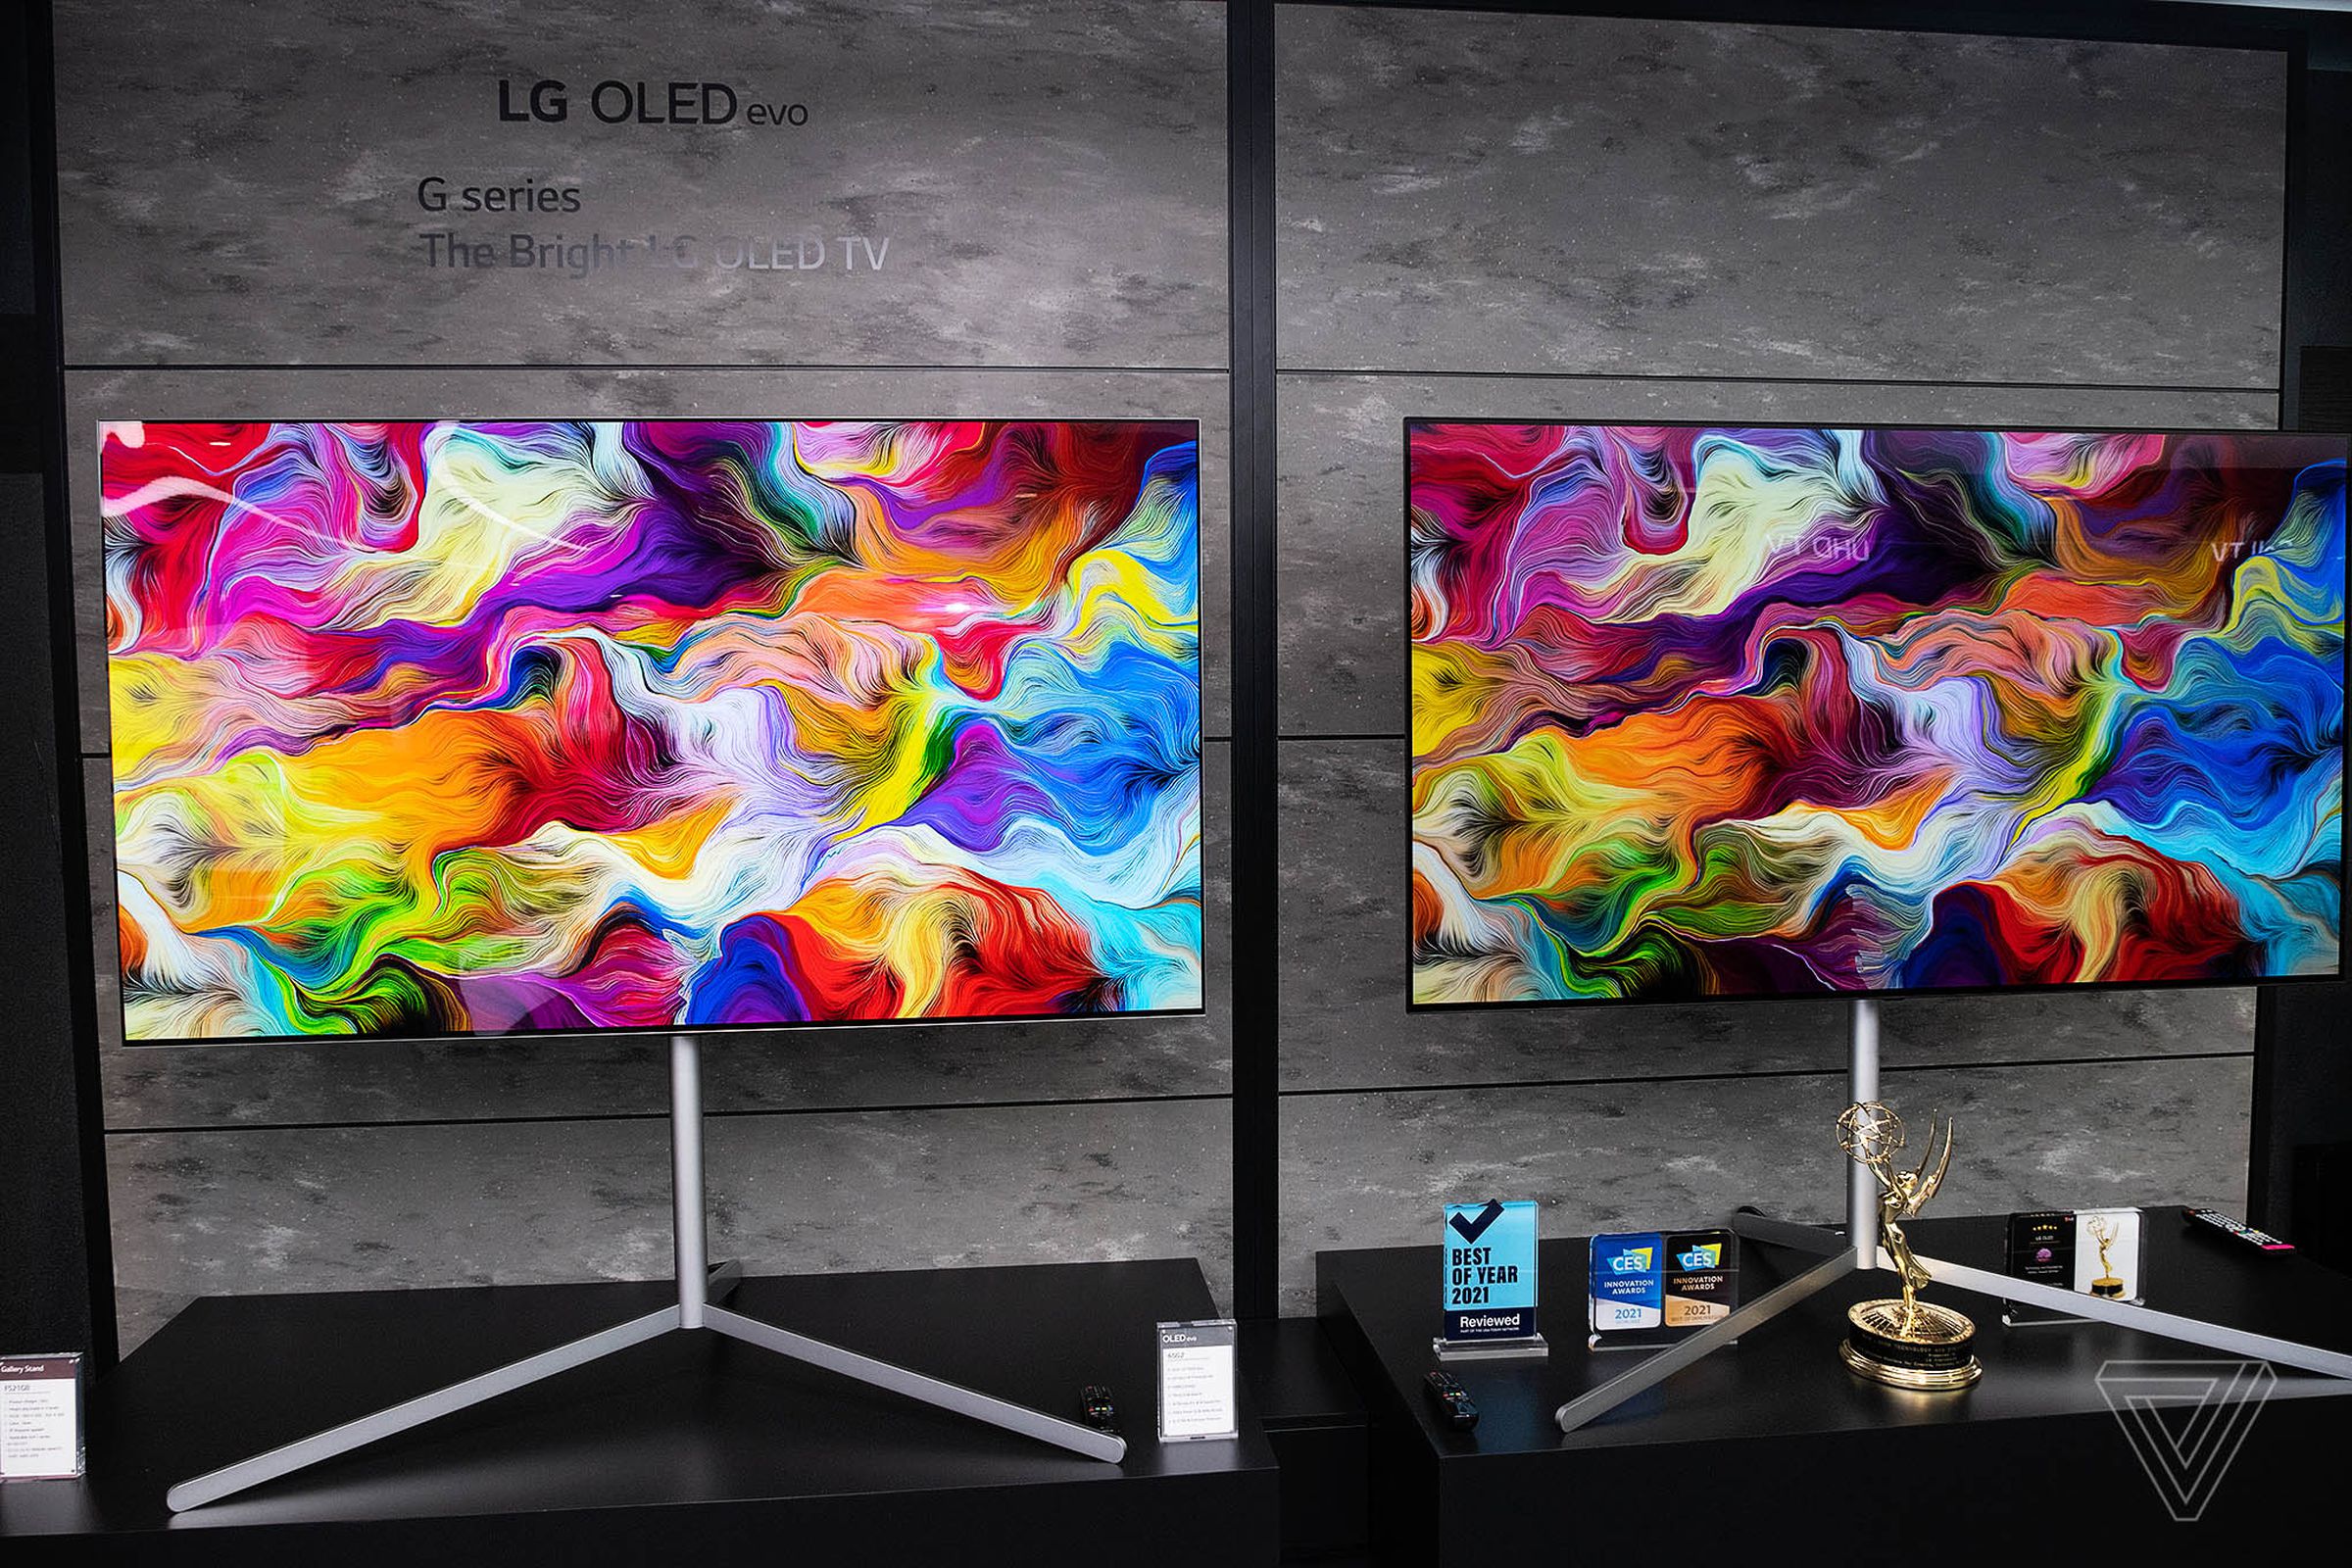 LG’s G2 (left) shown next to last year’s C1 OLED (right), which isn’t exactly the right comparison.